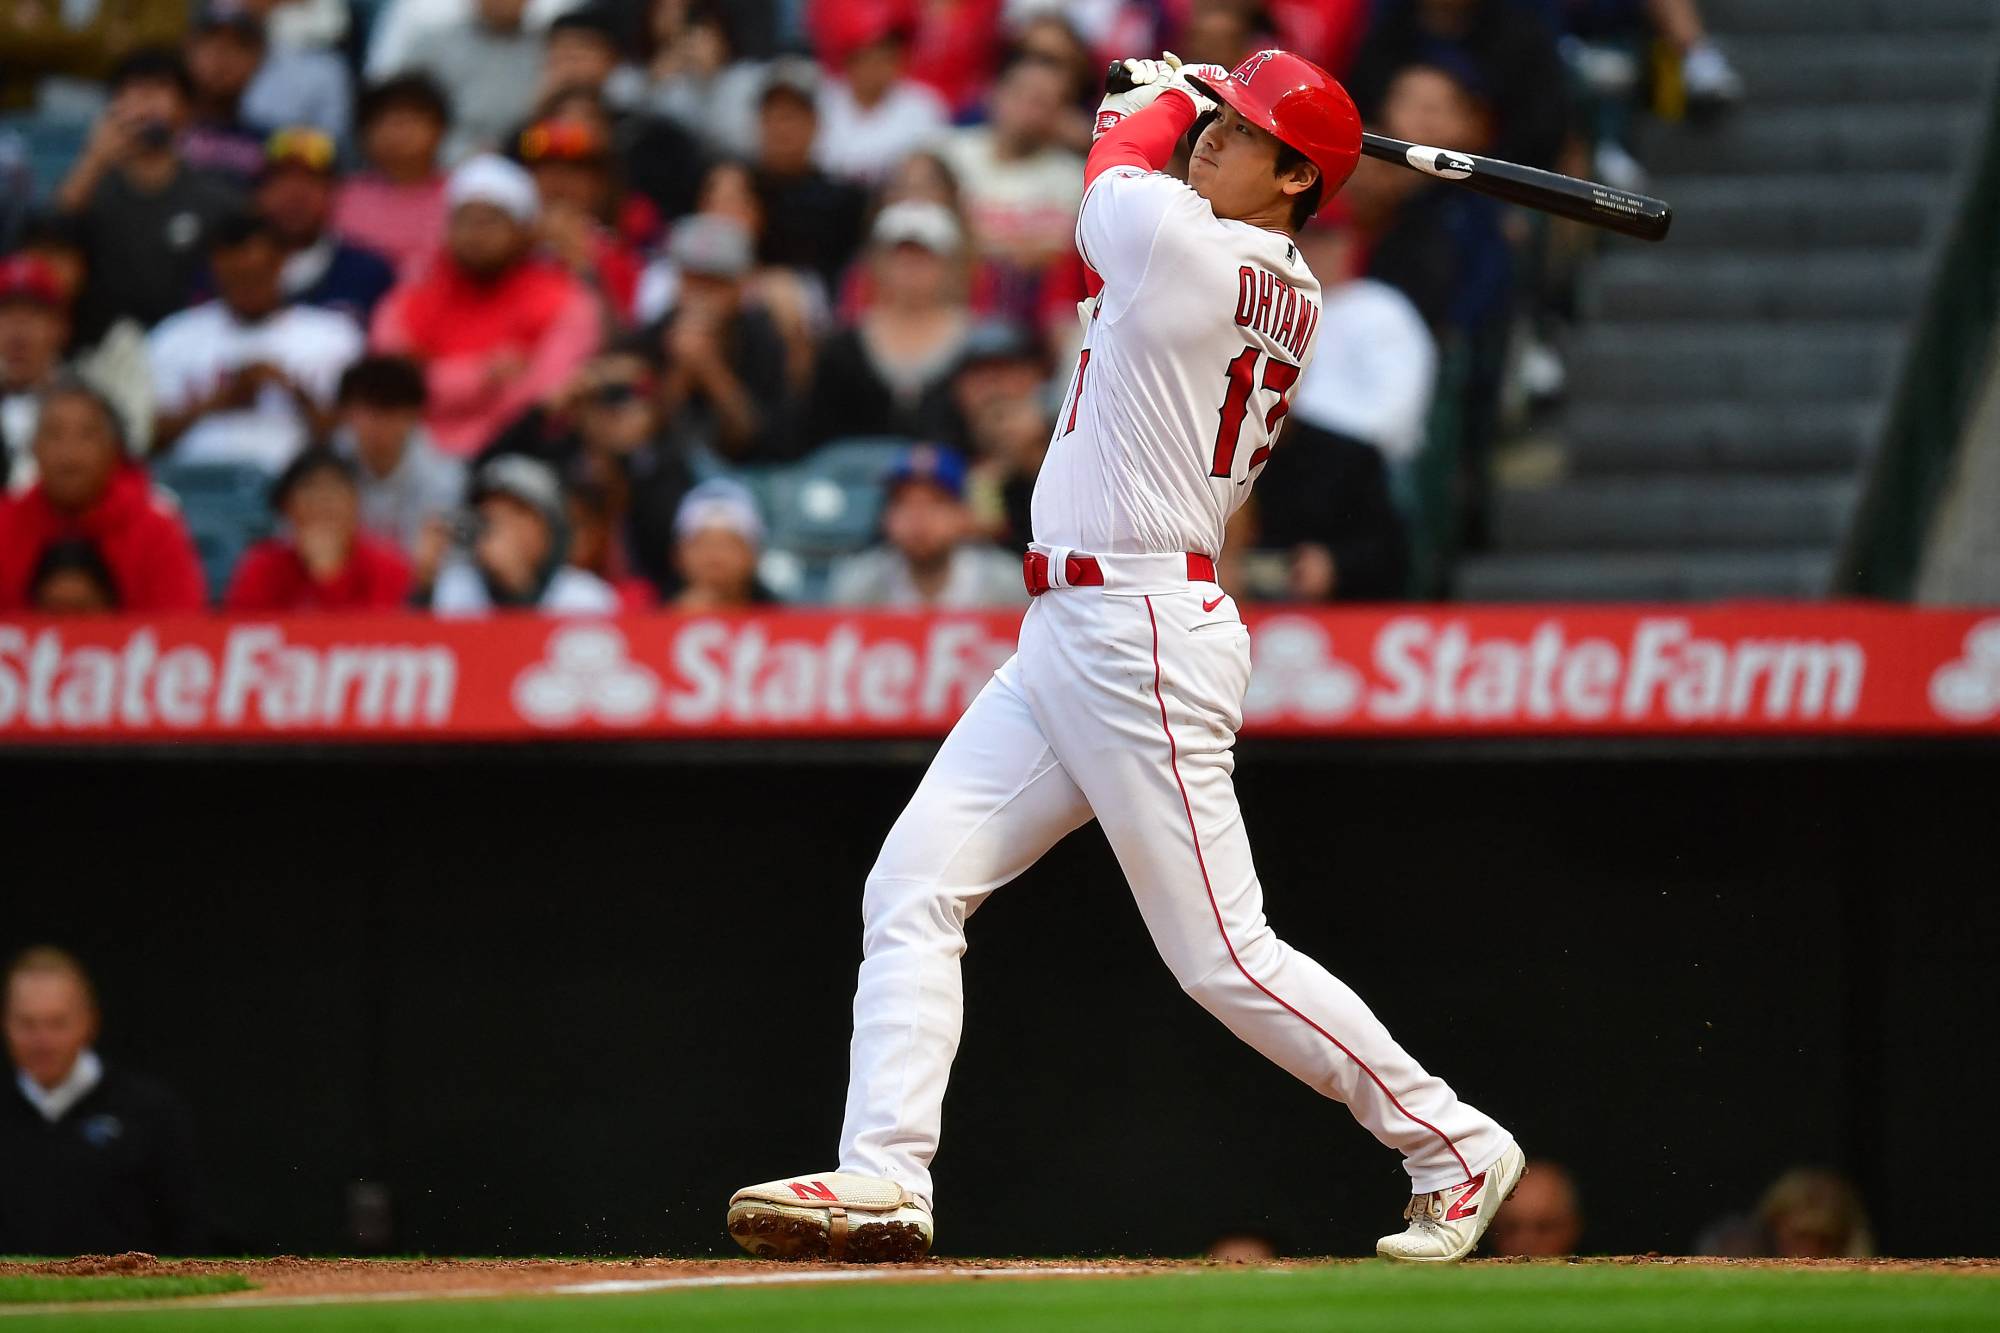 Shohei Ohtani stars at the plate, but not on the mound, as Angels top Mariners